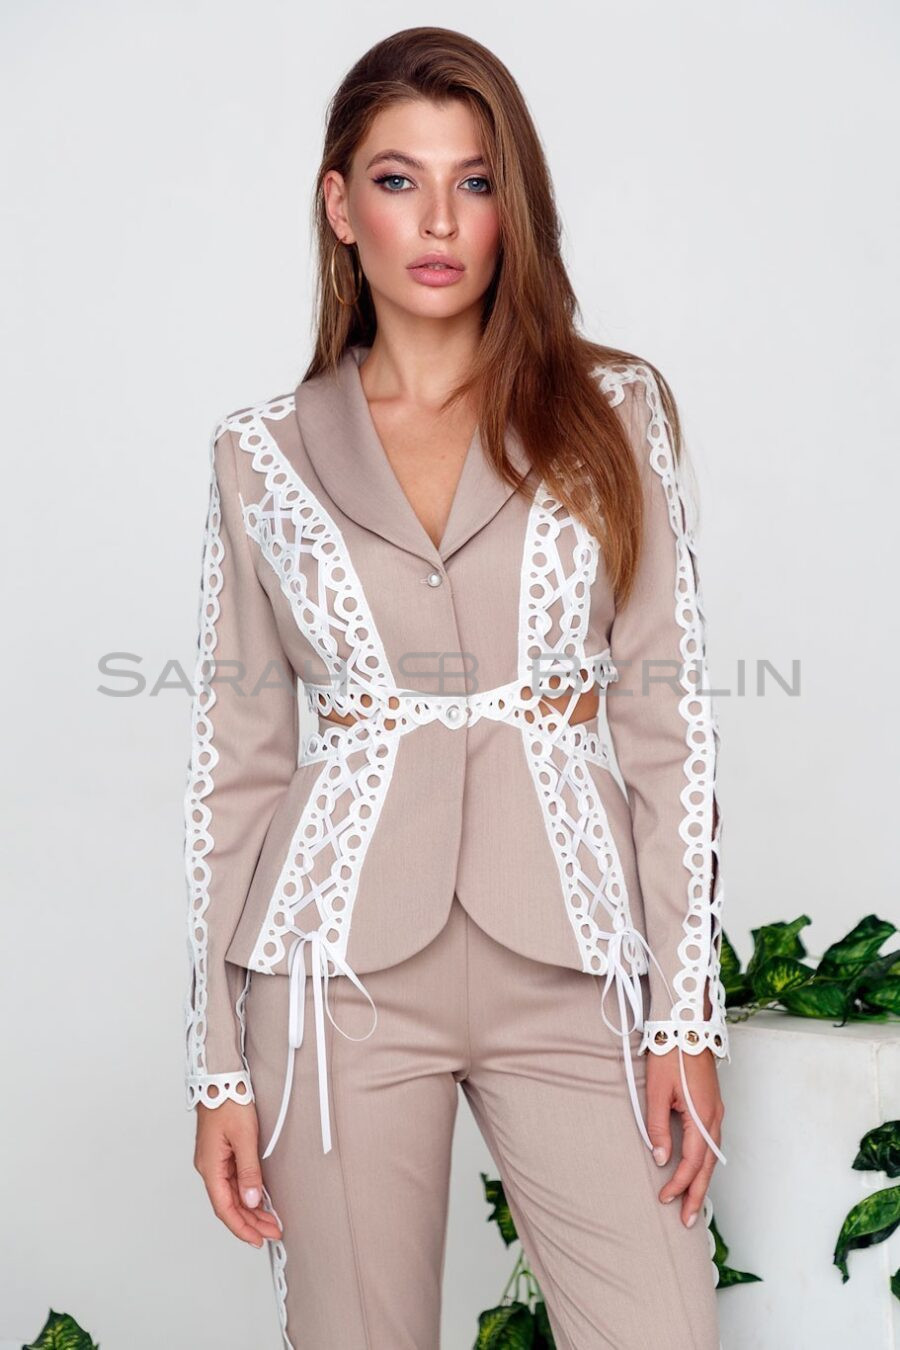 Stylish pants suit with lace and cord